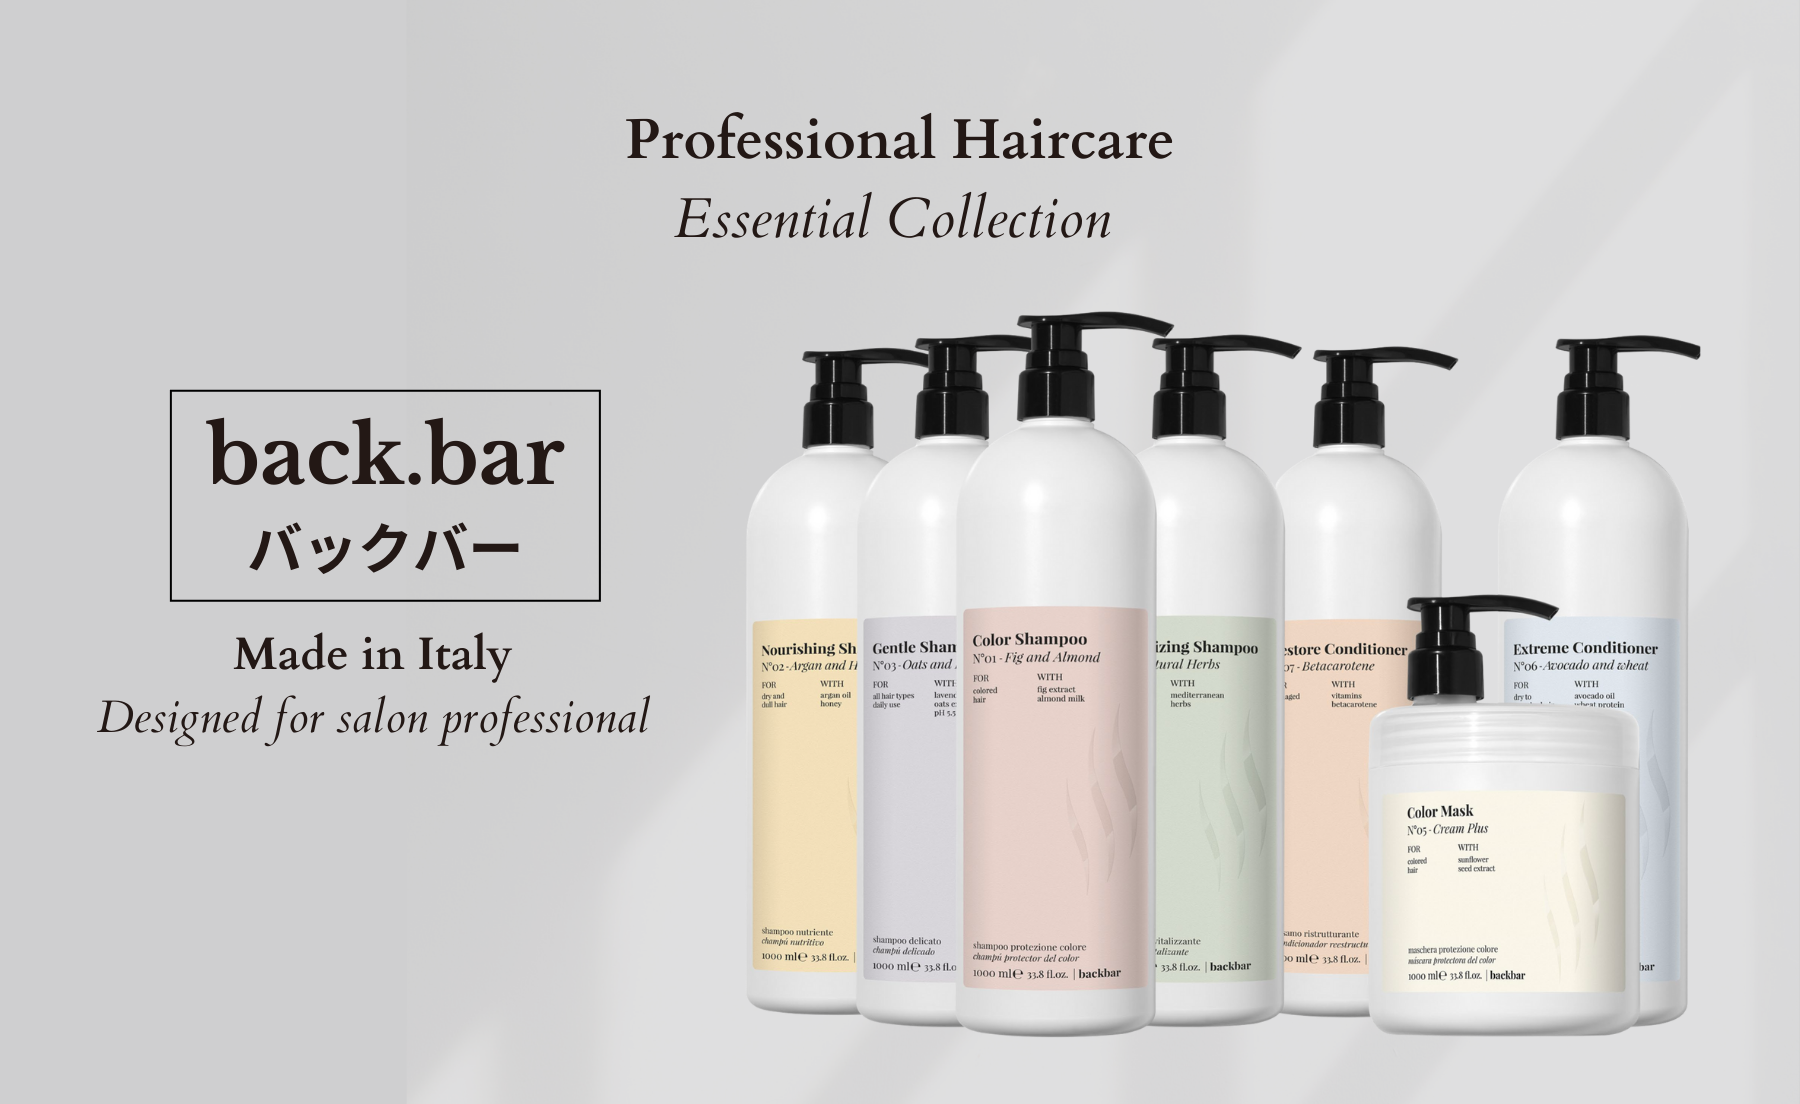 Back Bar, Designed for Salon Professional & Proudly Made in Italy.